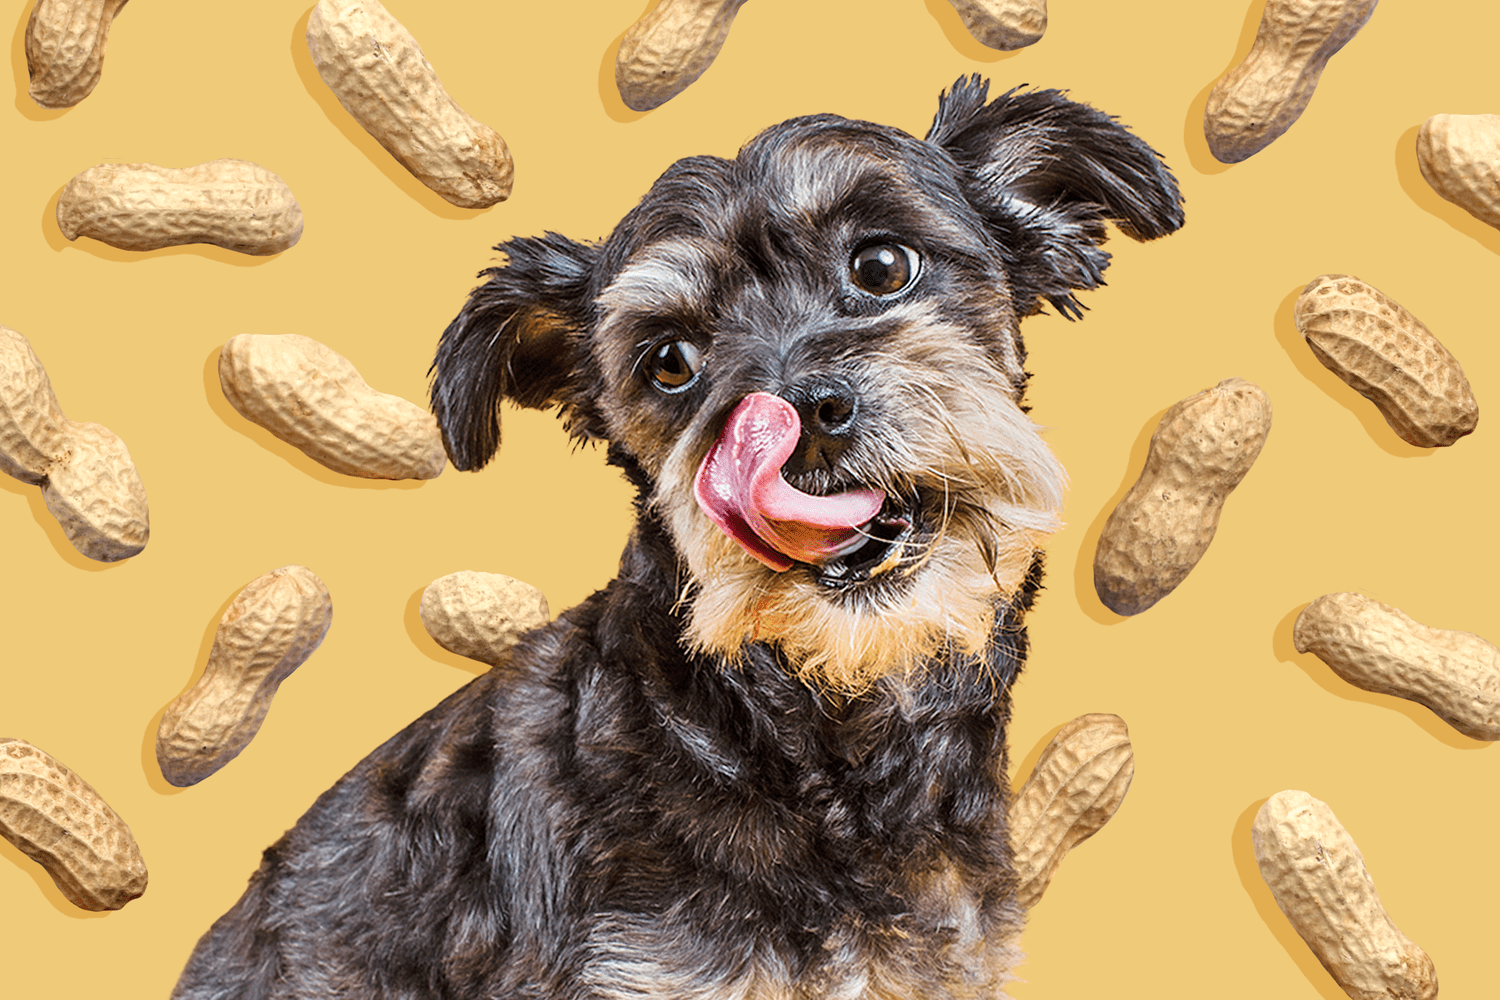 dog with background of peanuts in their shells; can dogs eat peanuts?